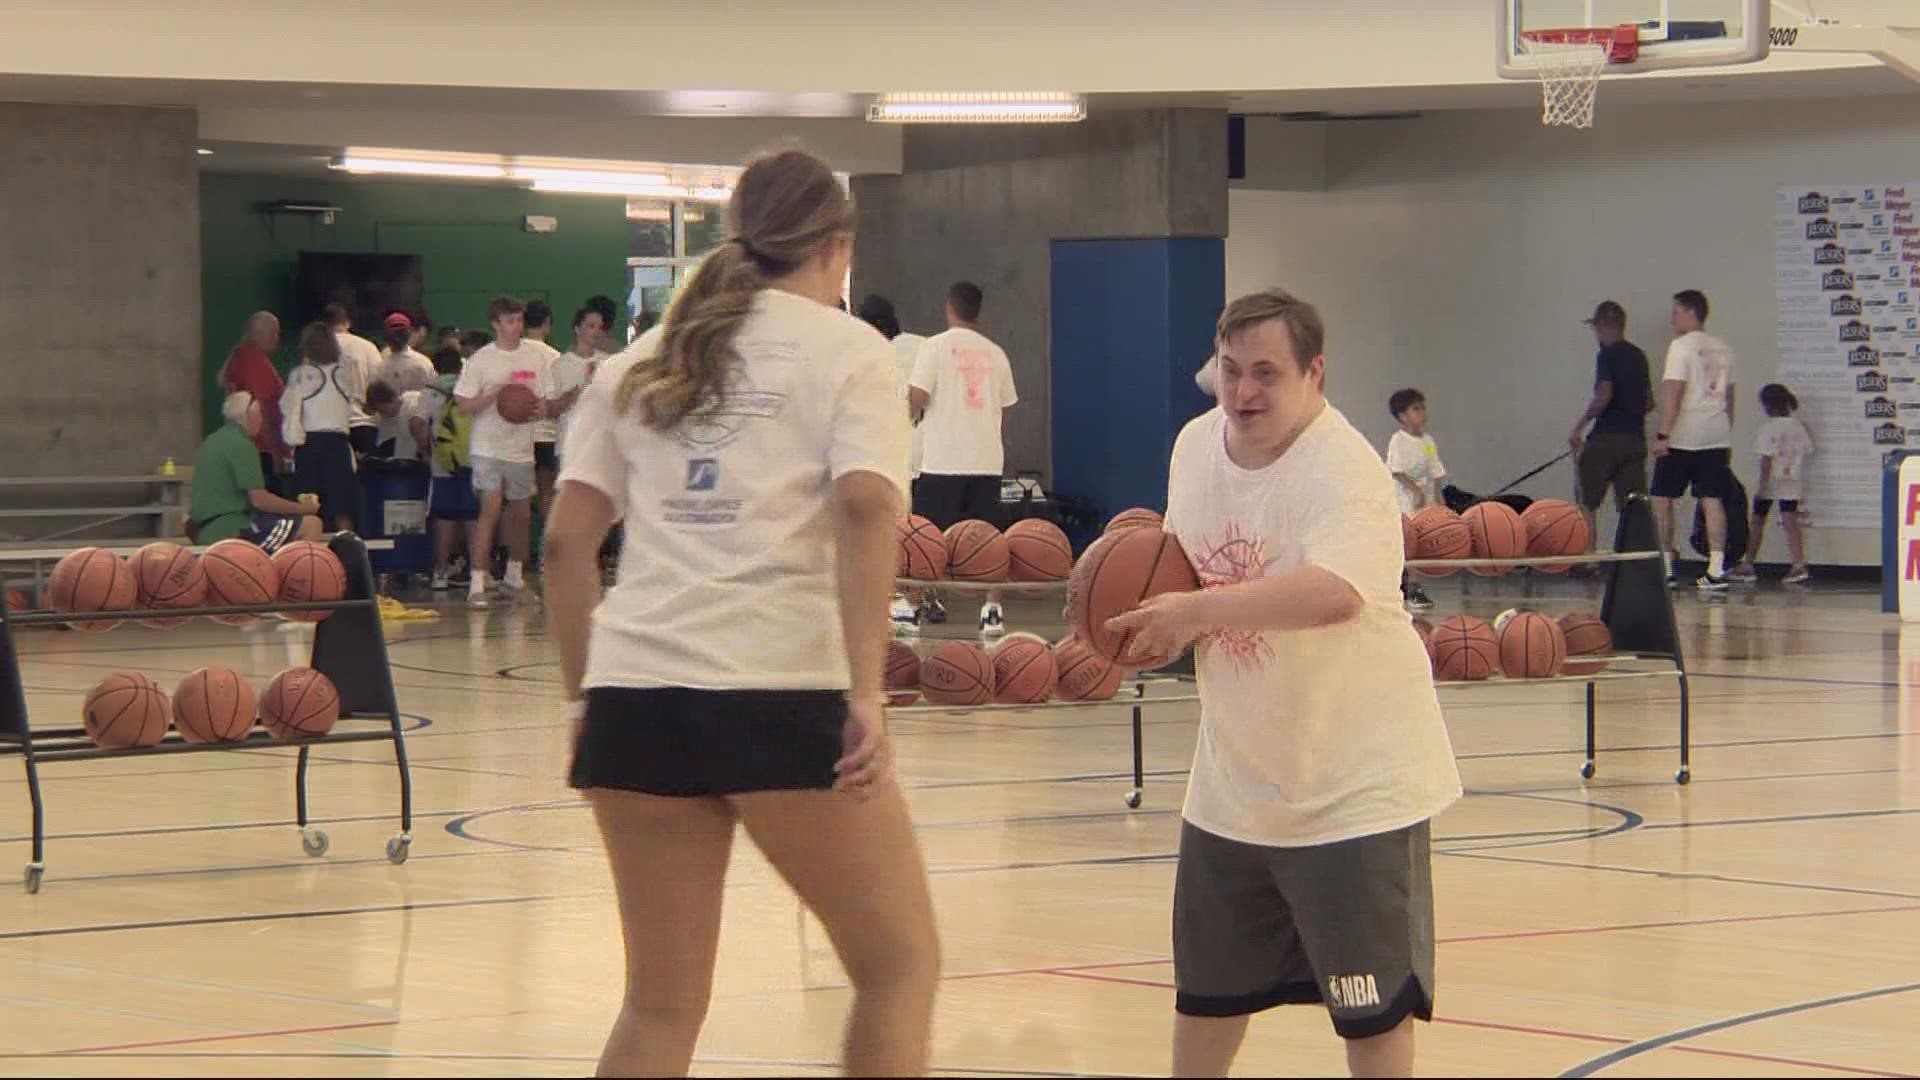 Basketball players of all abilities are hitting the courts in Beaverton through Hoop Camp. It's an inclusive summer program designed for kids and adults.